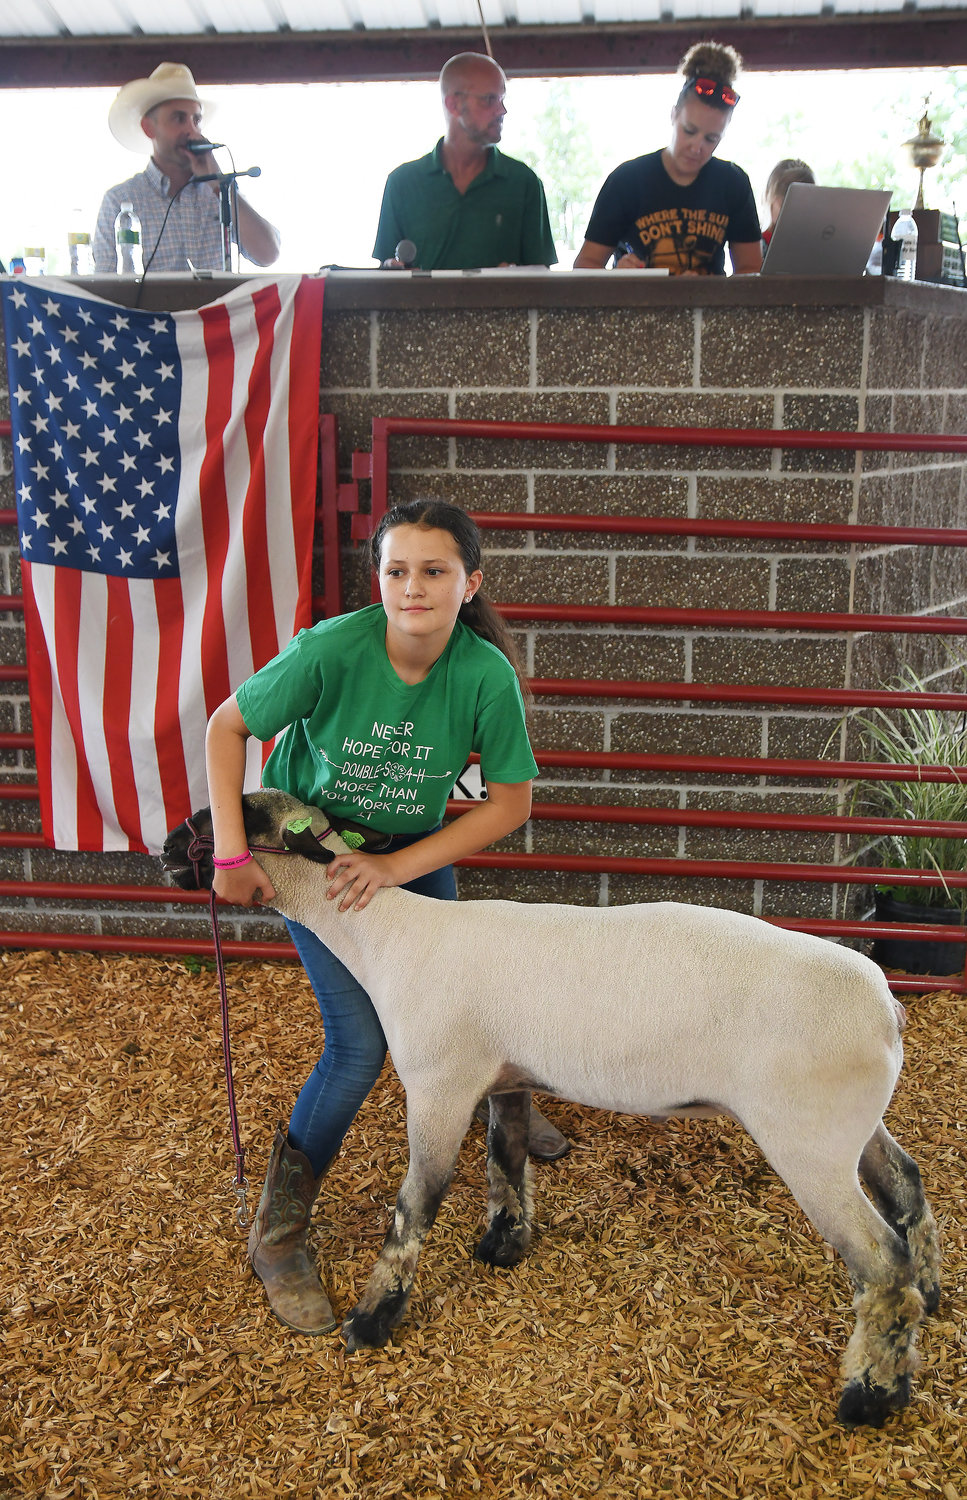 EILEEN SWOFFORD with the Double-S 4-H Club resells her lamb Saturday to benefit the Hermann FFA chapter.